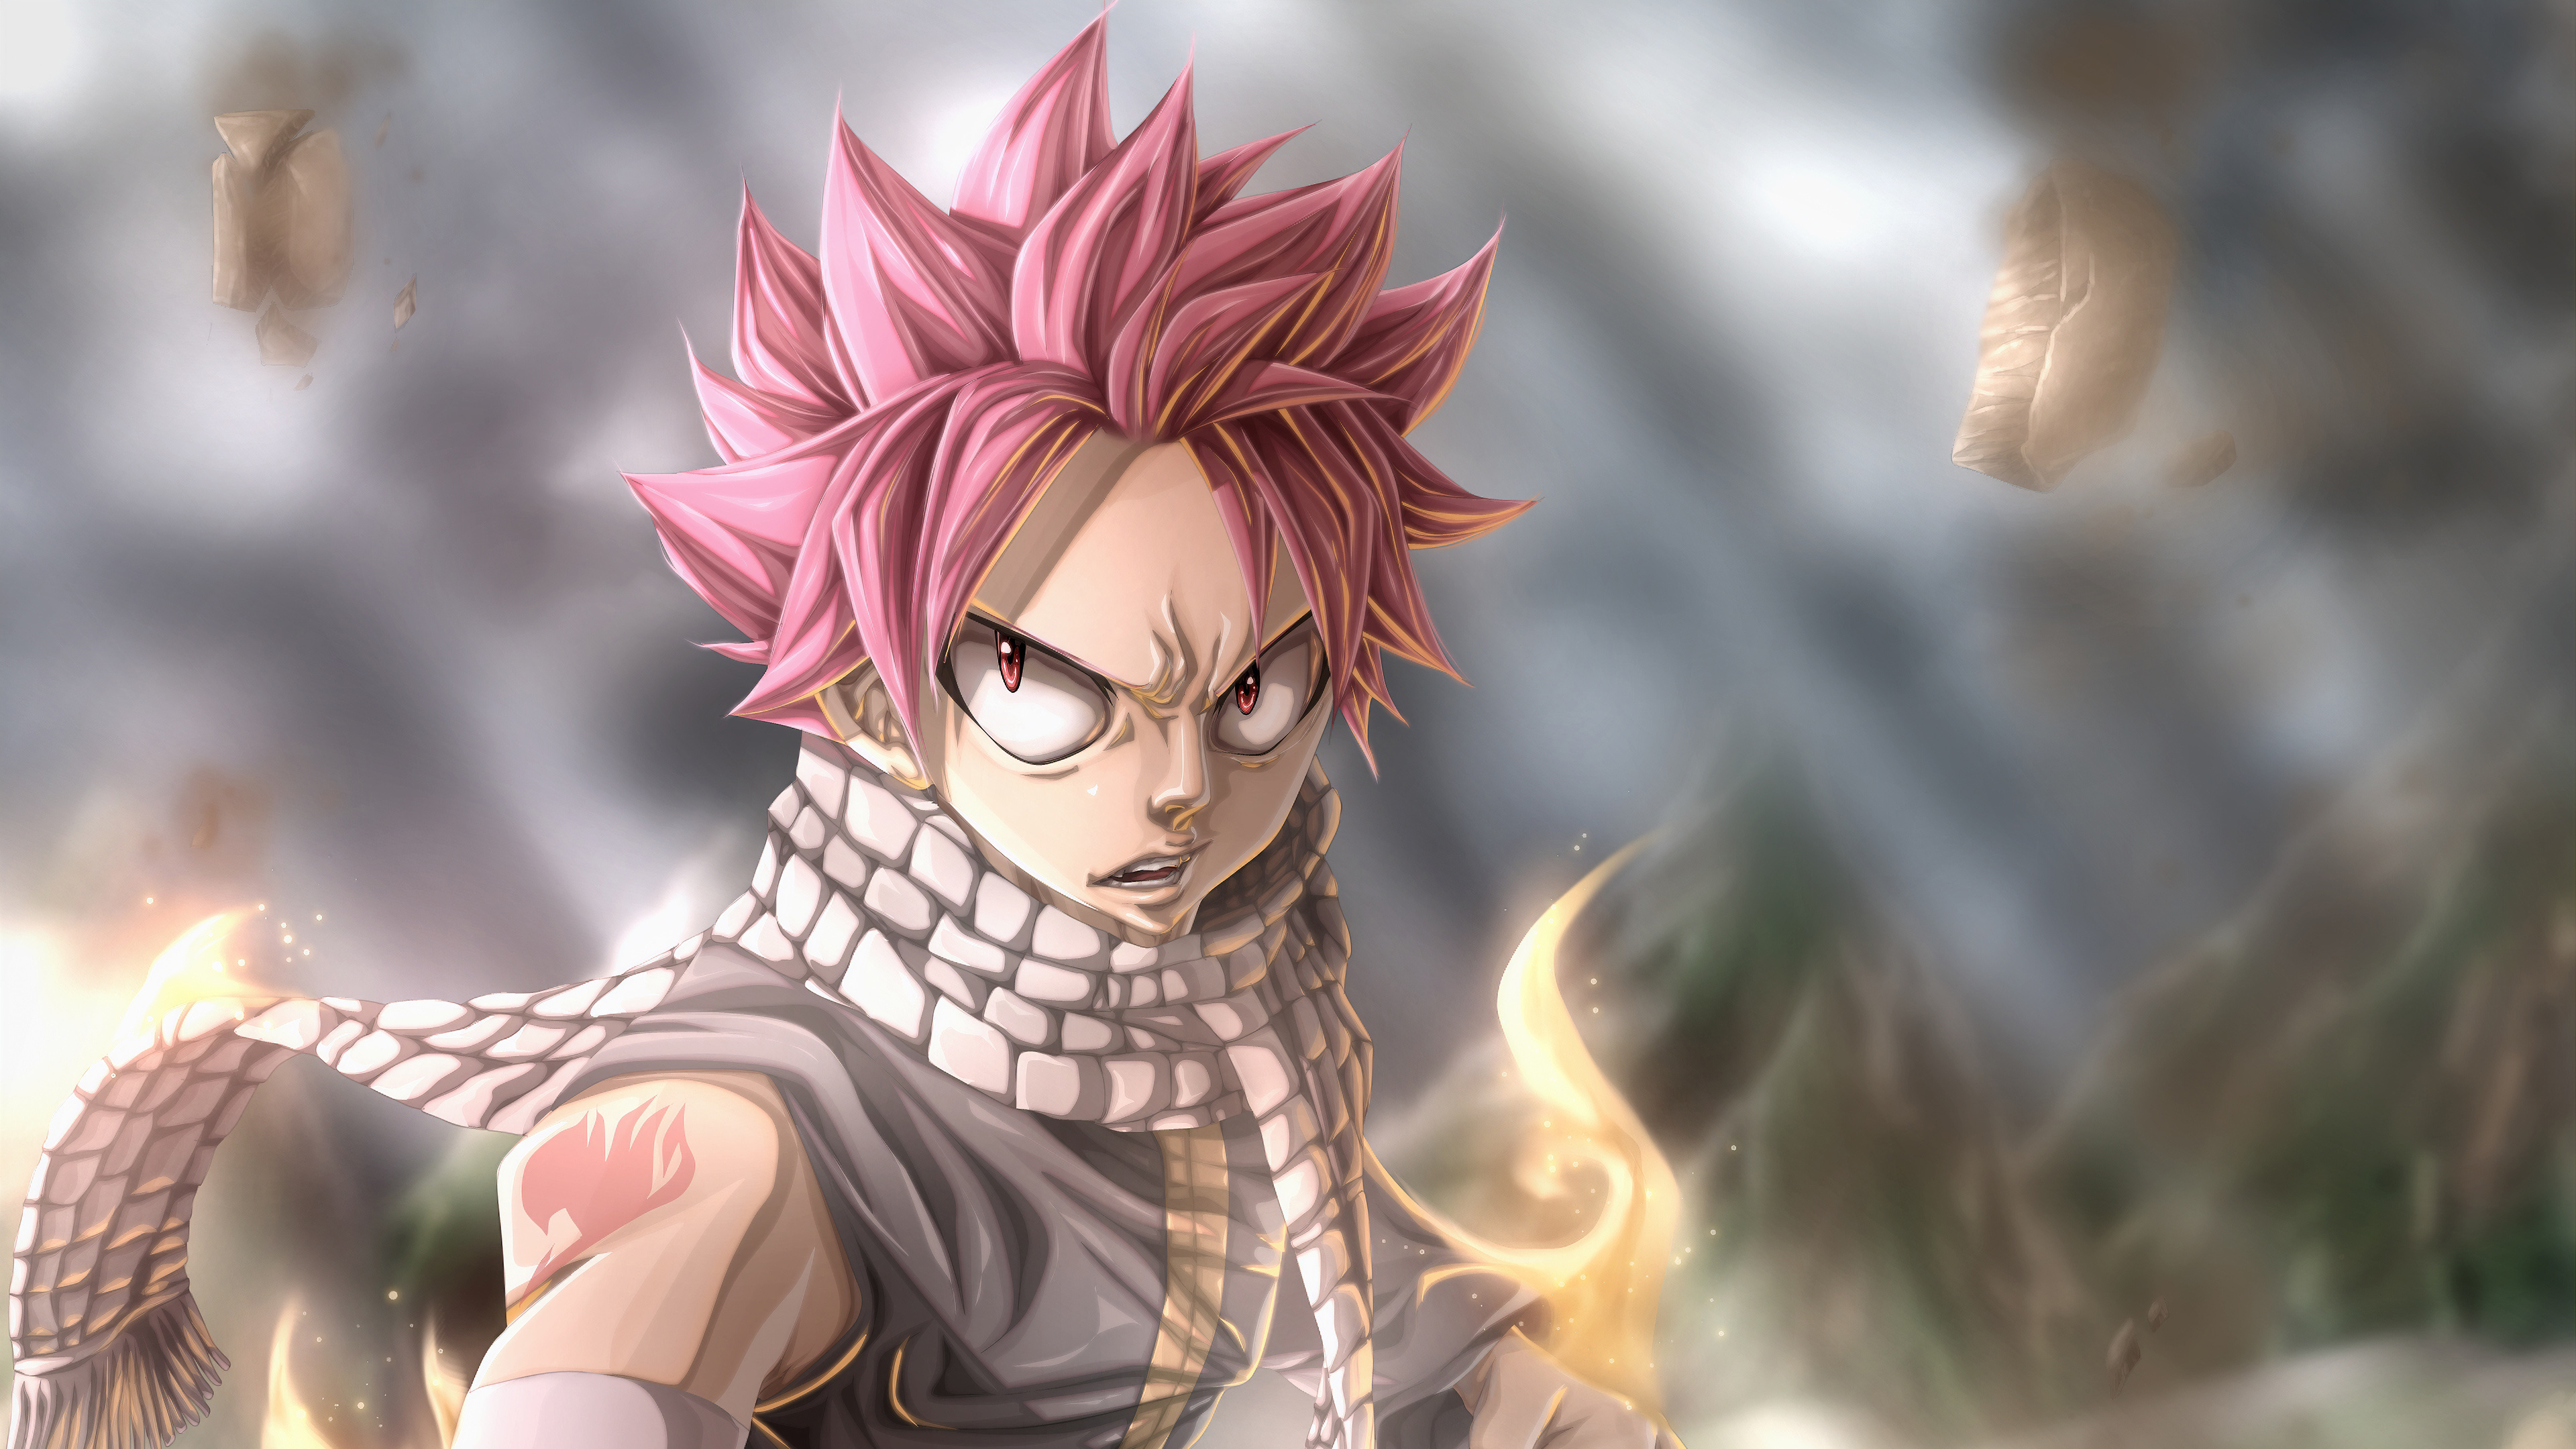 Natsu (Fairy Tail): A Mage of the Guild, Anime. 3840x2160 4K Wallpaper.